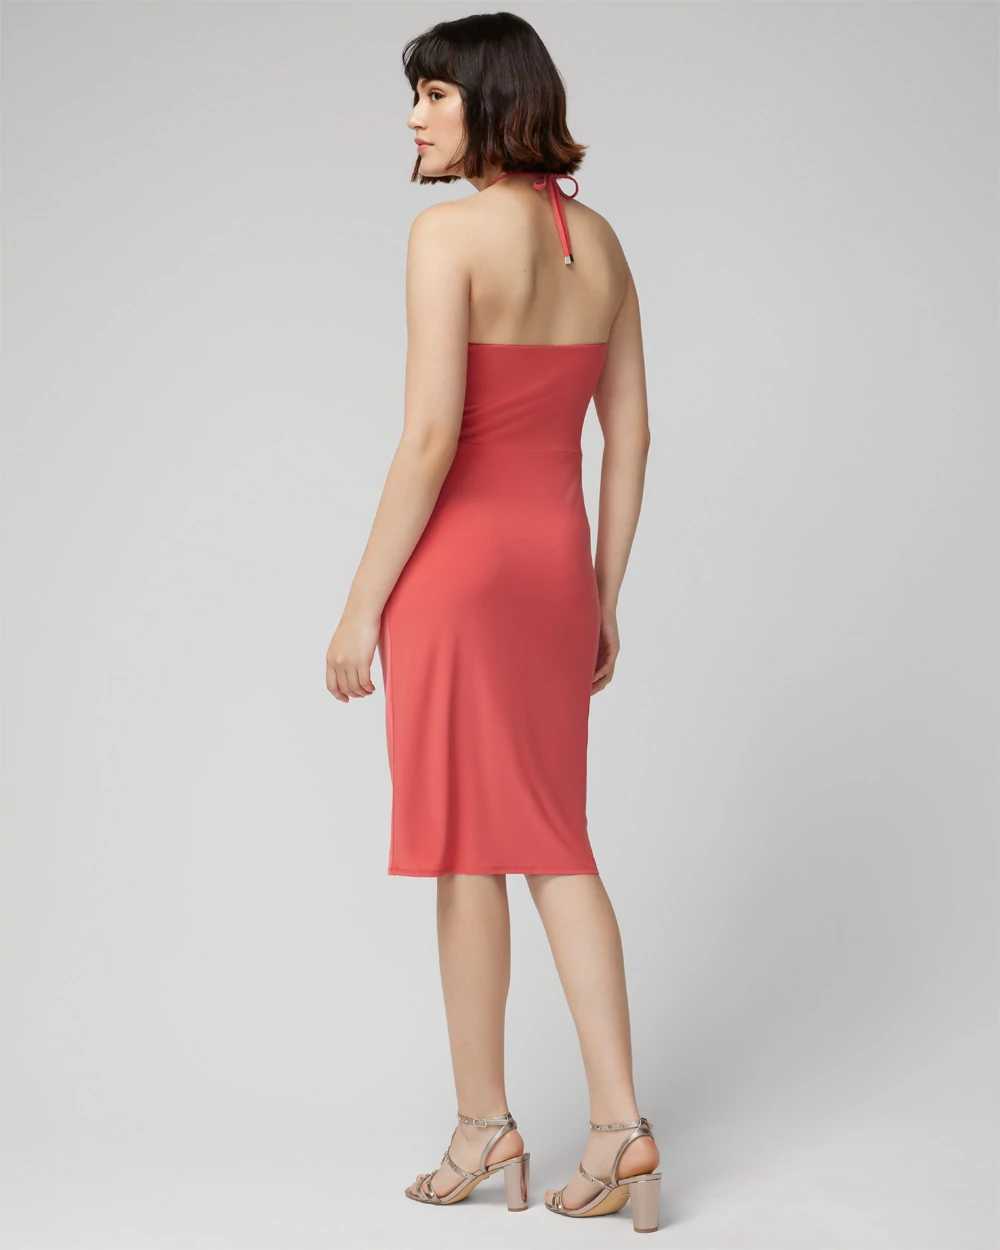 Sleeveless Ruched Halter Matte Jersey Midi Dress click to view larger image.